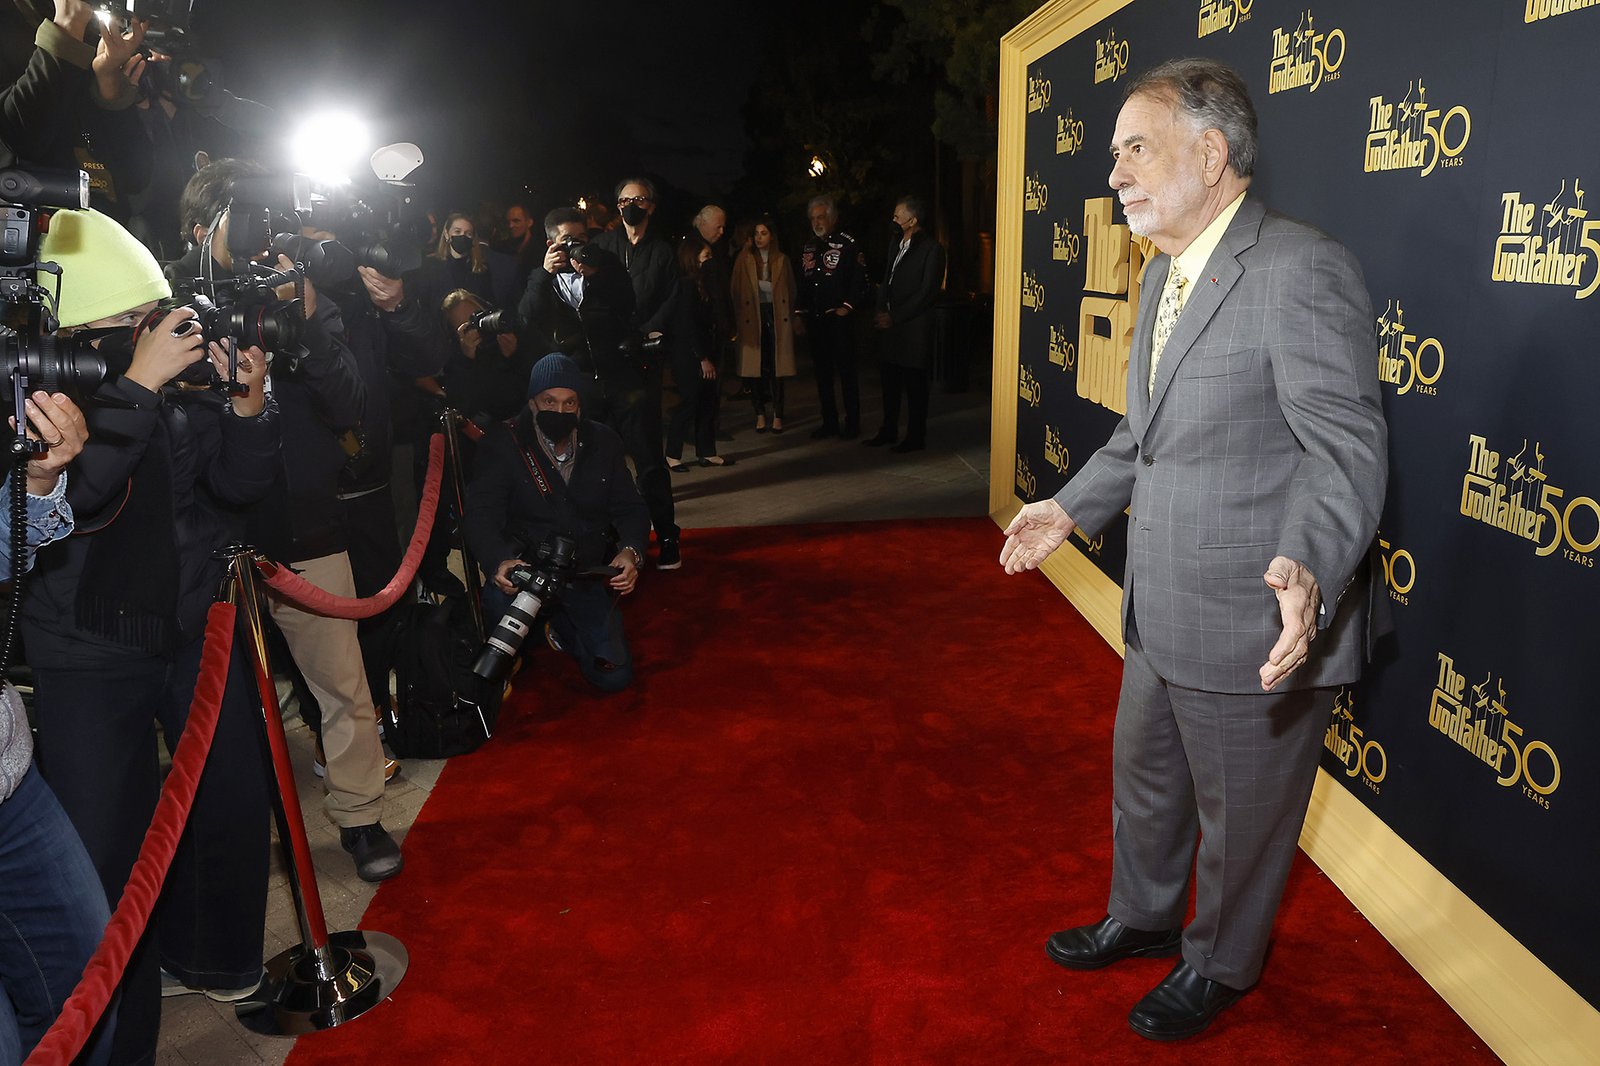 On February 22, Coppola will attend the 50th anniversary of the film "The Godfather." Paramount Pictures/Getty Images